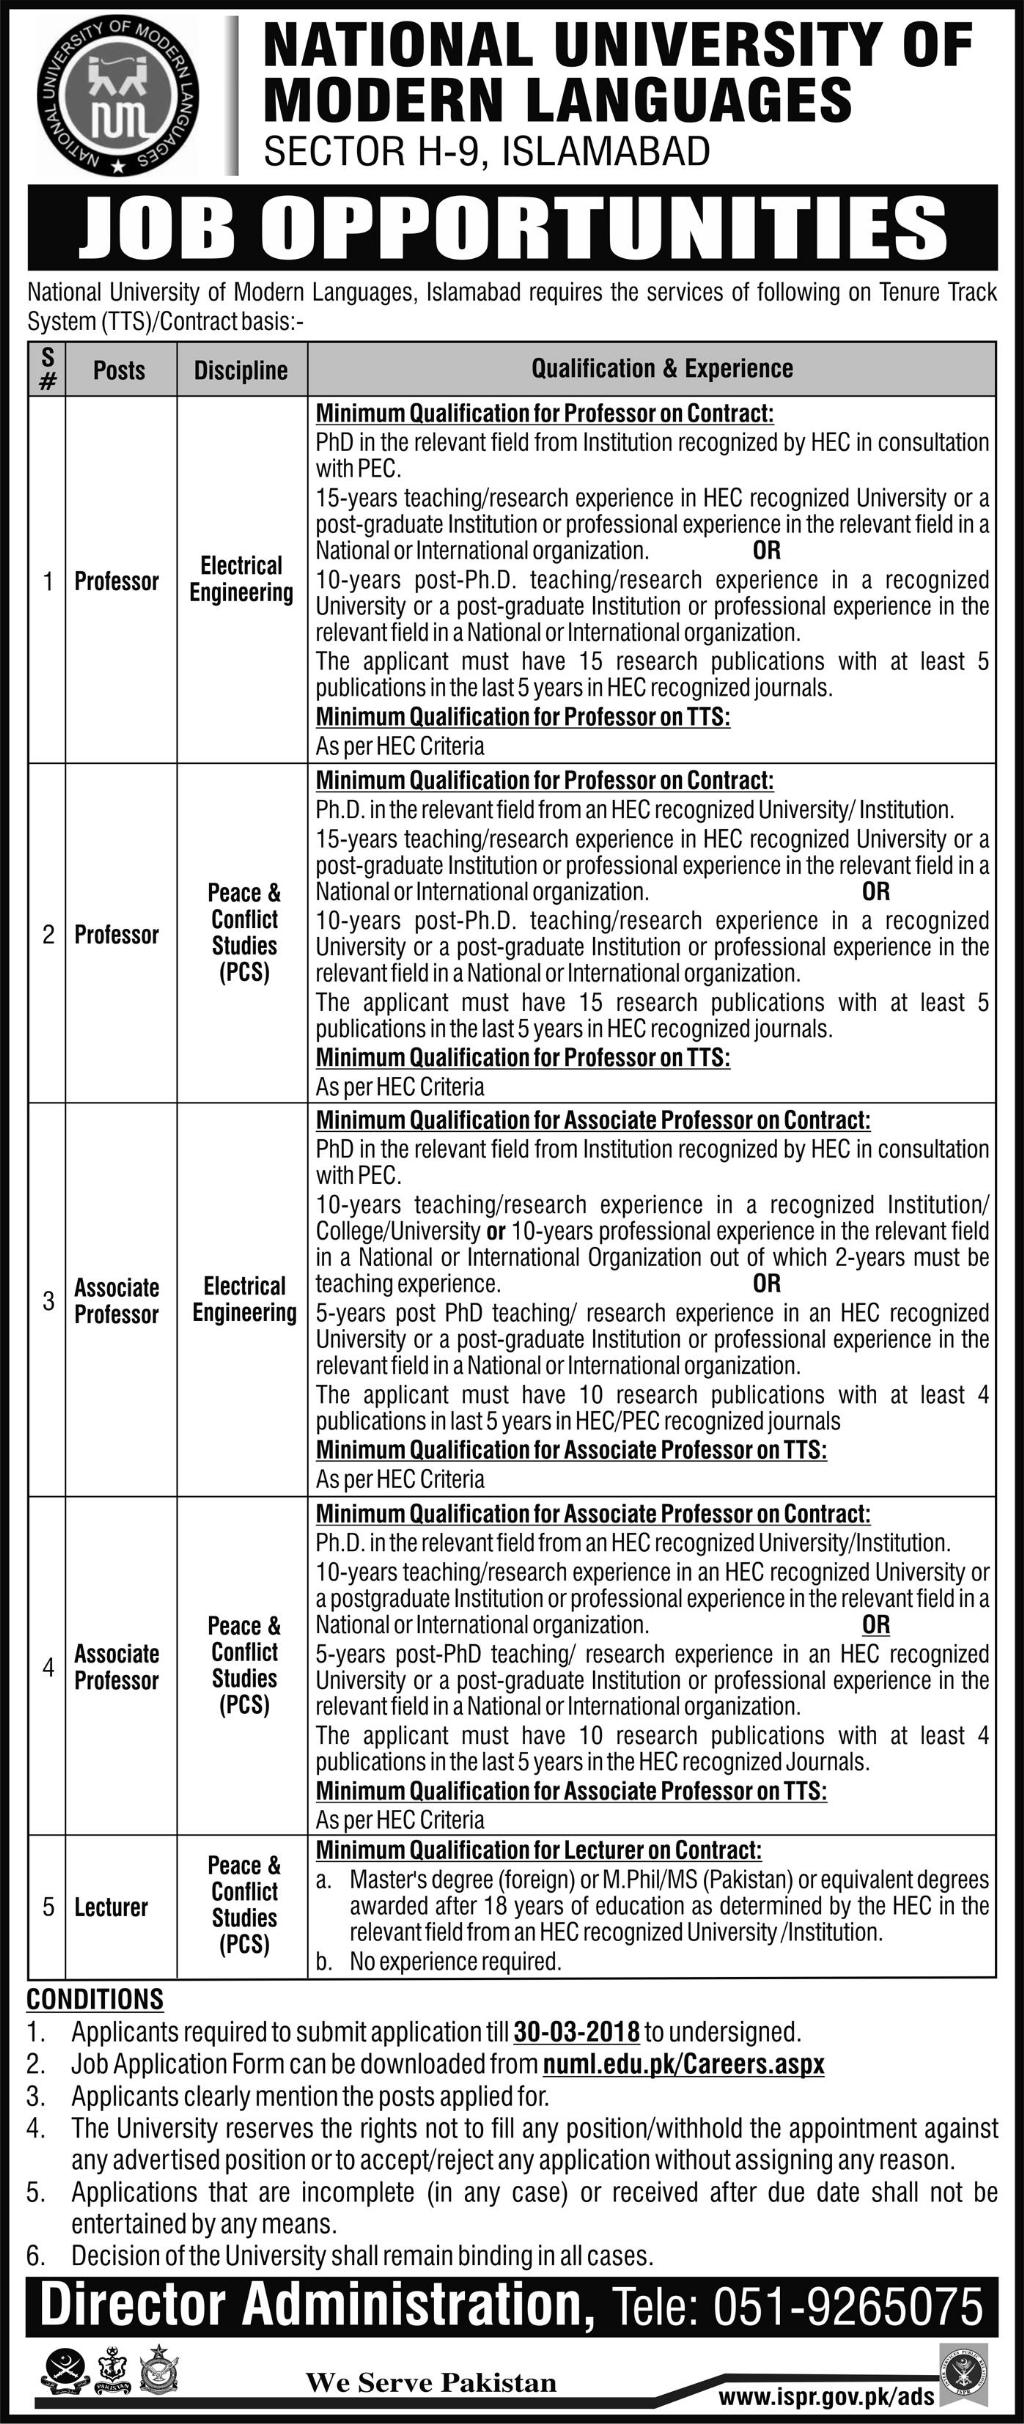 Jobs in National University of Modern Languages (NUML) Daily Express Newspaper 16 March 2018